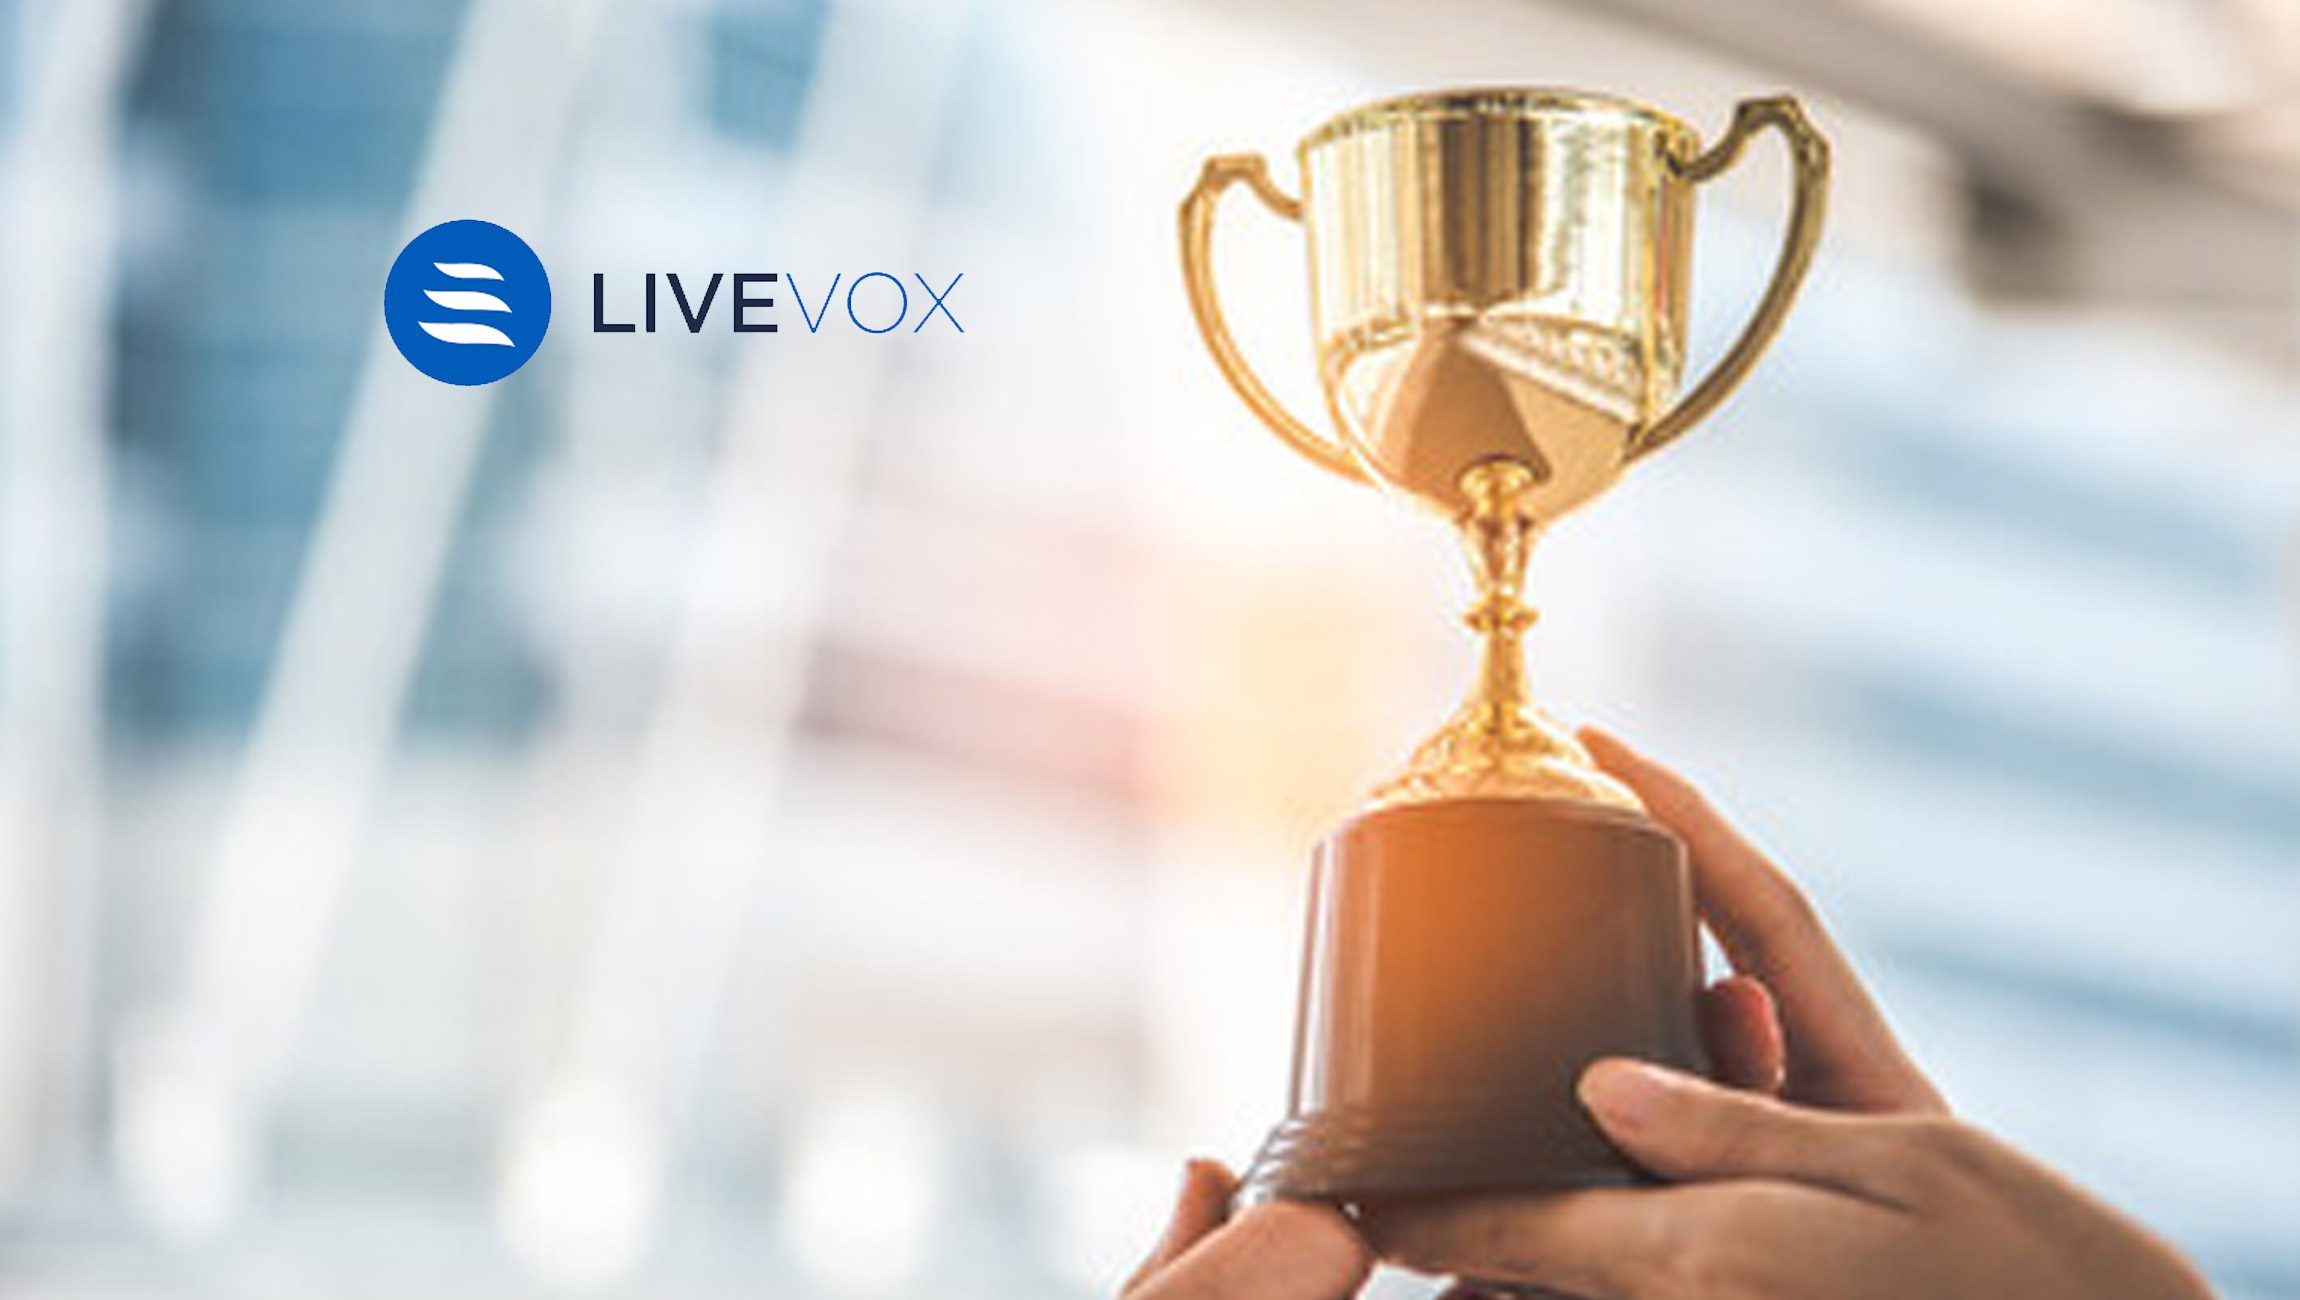 LiveVox Wins 2022 Top Workplaces Culture Excellence Awards